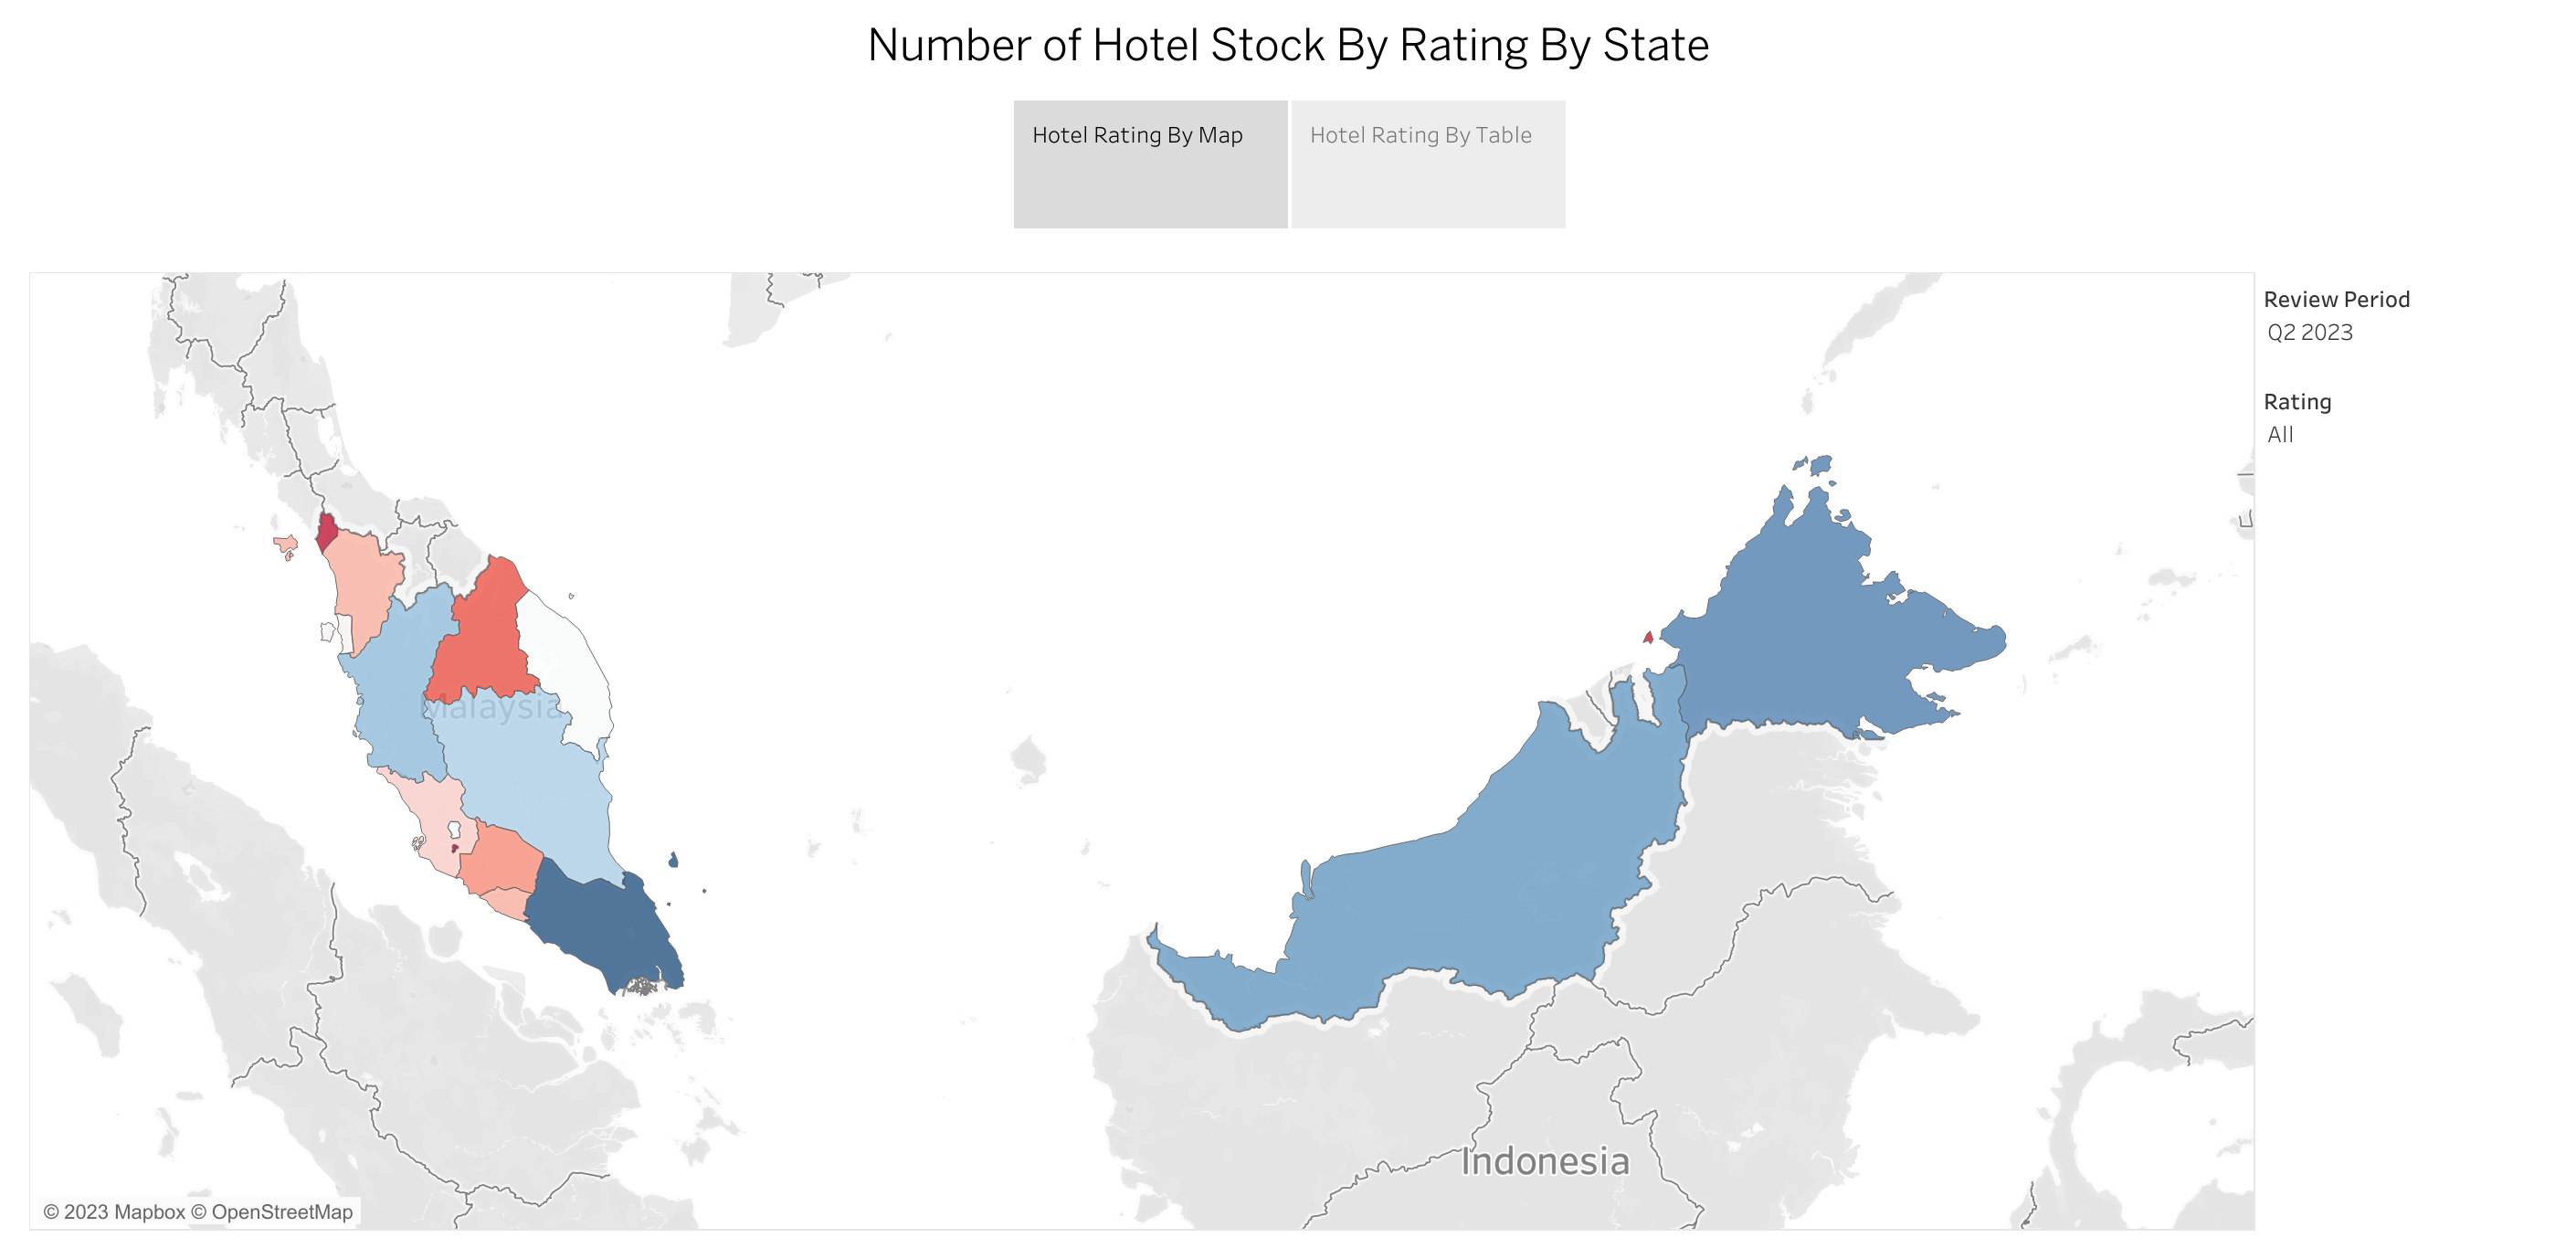 Number of Hotel Stock By Rating By State